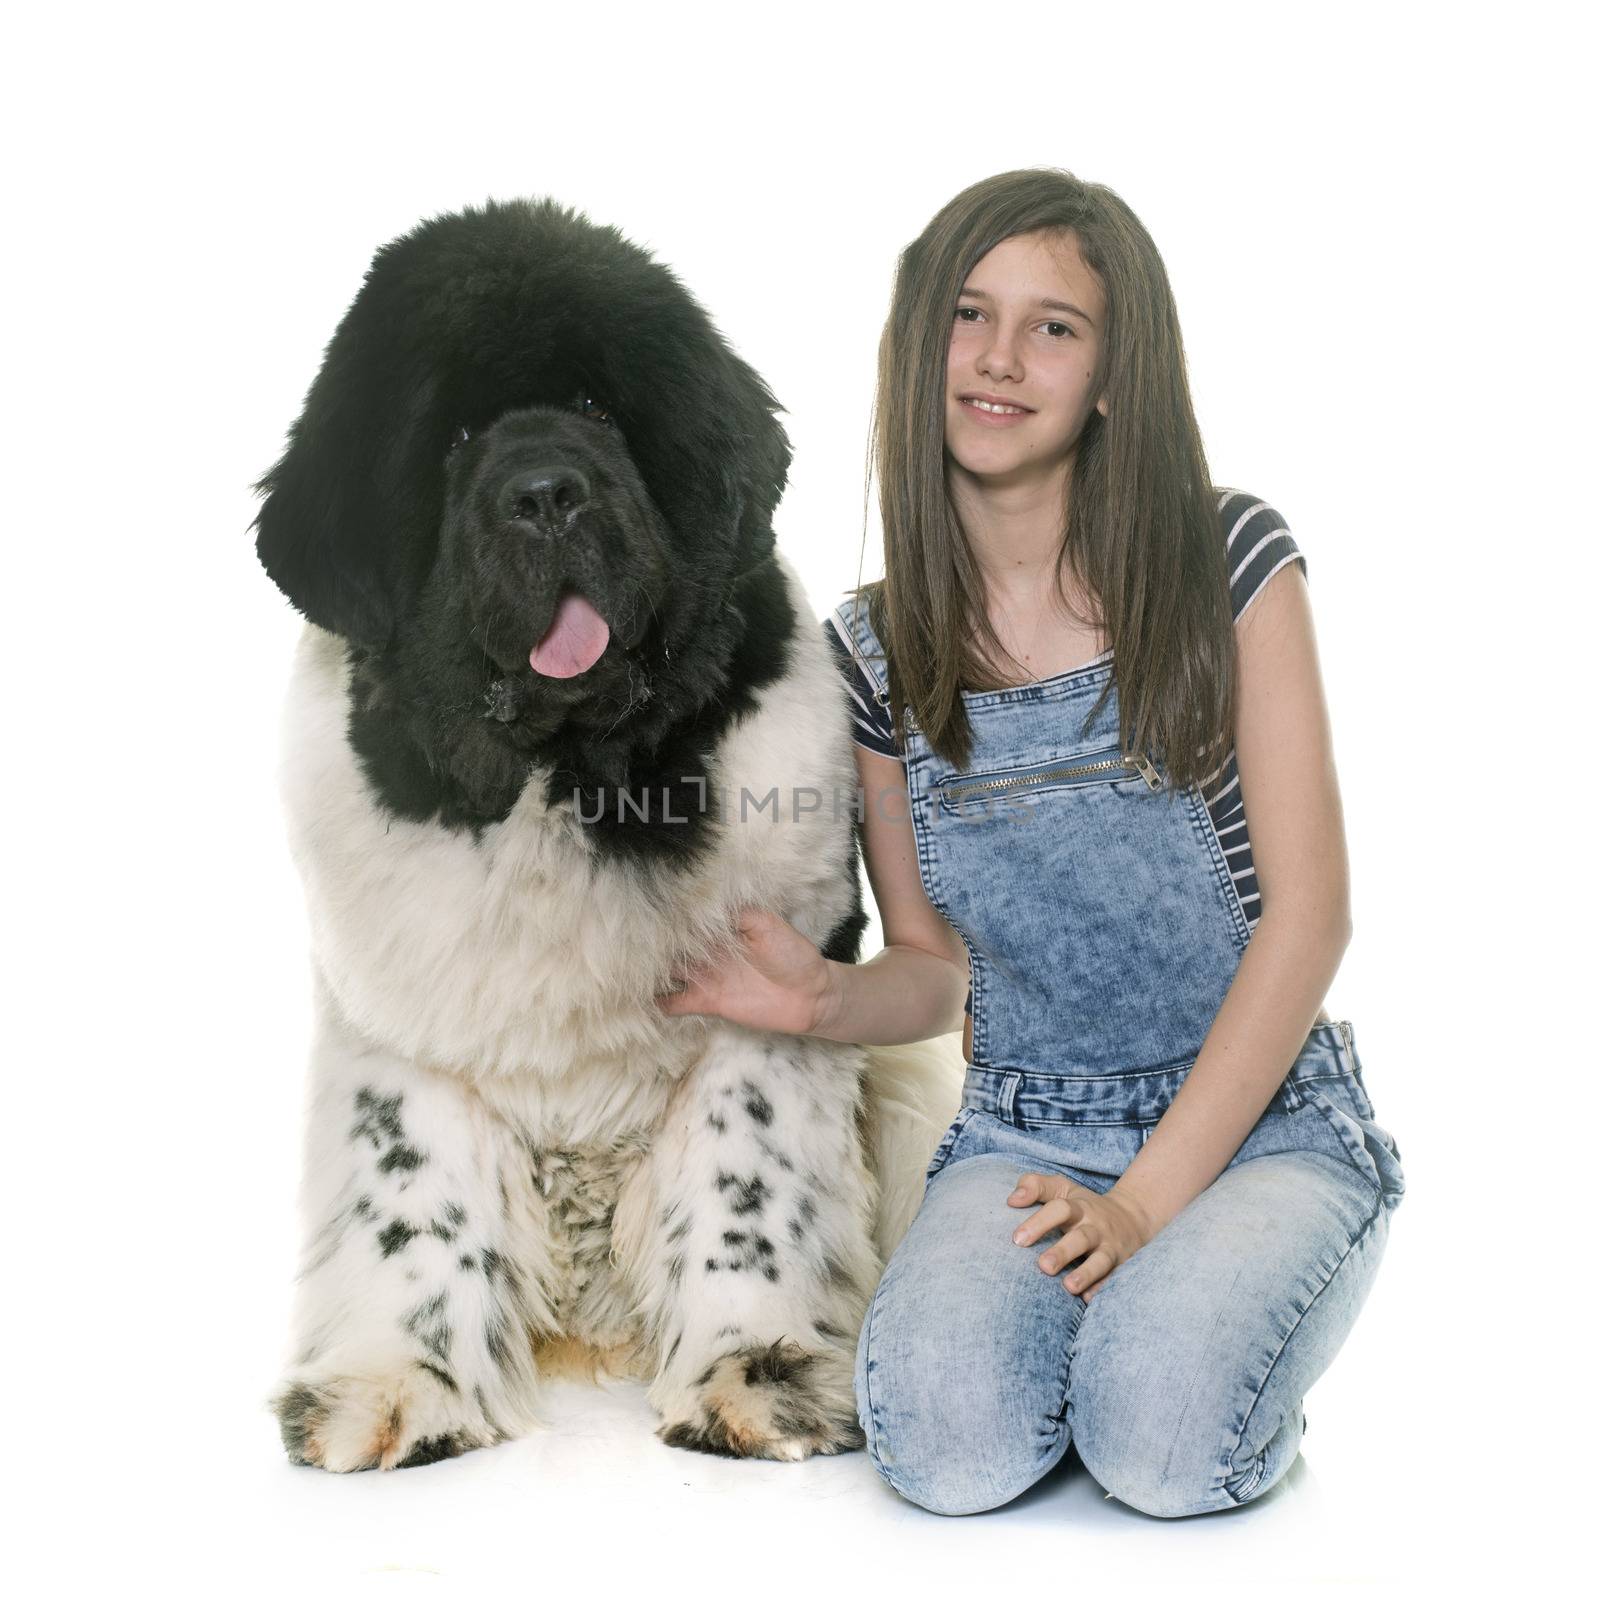 teenager and newfoundland dog in front of white background